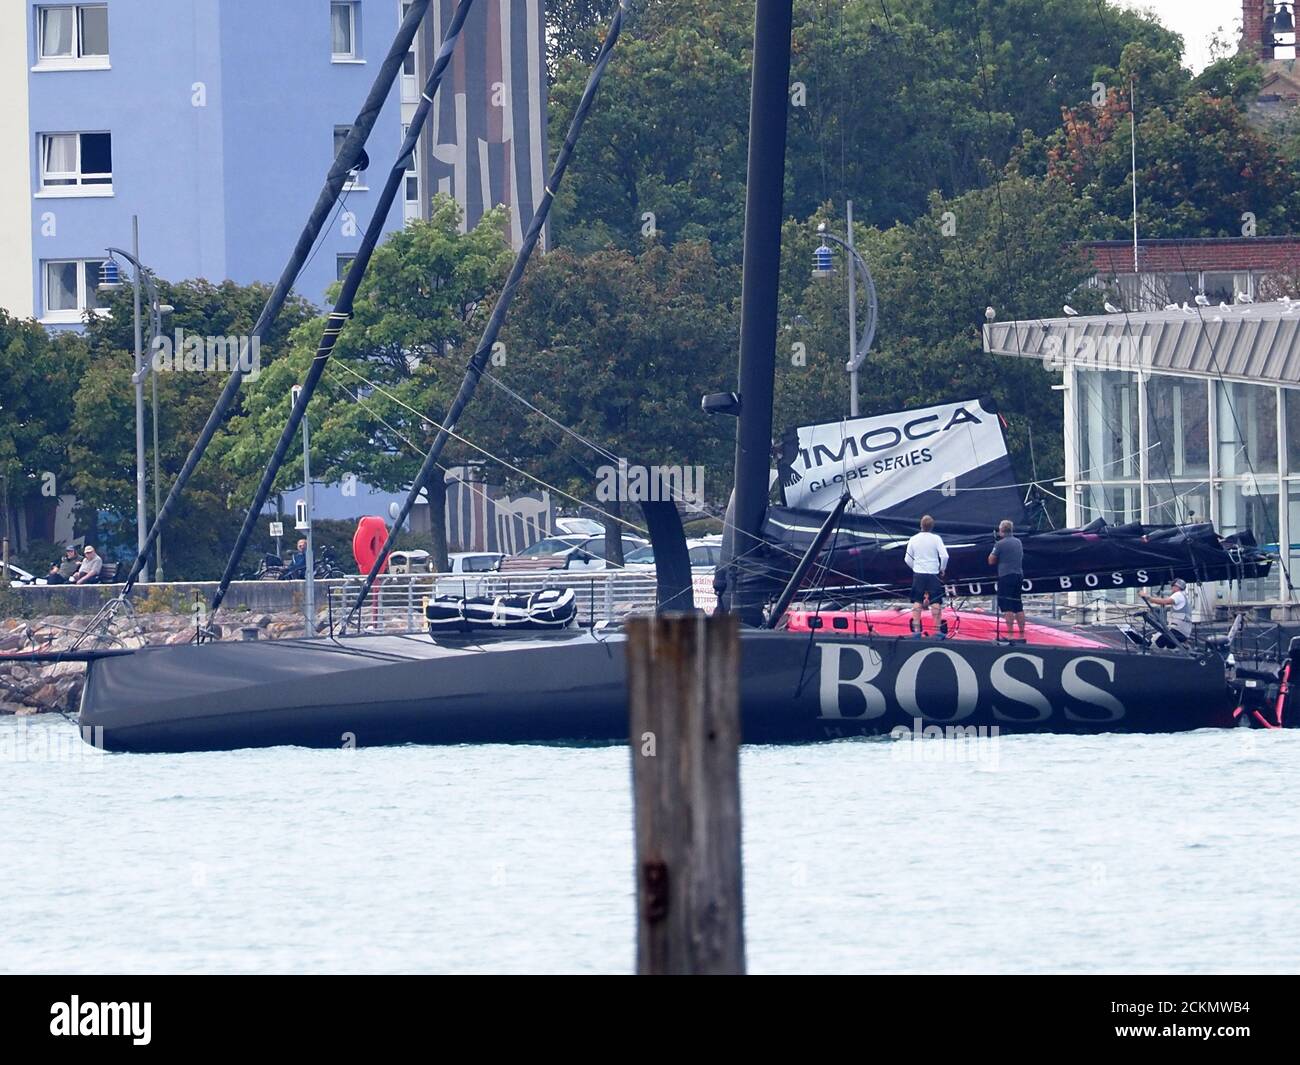 Portsmouth, Hampshire, UK. 16th September, 2020. Well known British yachtsman Alex Thomson was spotted preparing his distinctive black new Hugo Boss yacht for a training session this afternoon, with the help of his team near Portsmouth, in preparation for the Vendée Globe solo non stop around the world race which starts on 8 November.  Credit: James Bell/Alamy Live News Stock Photo